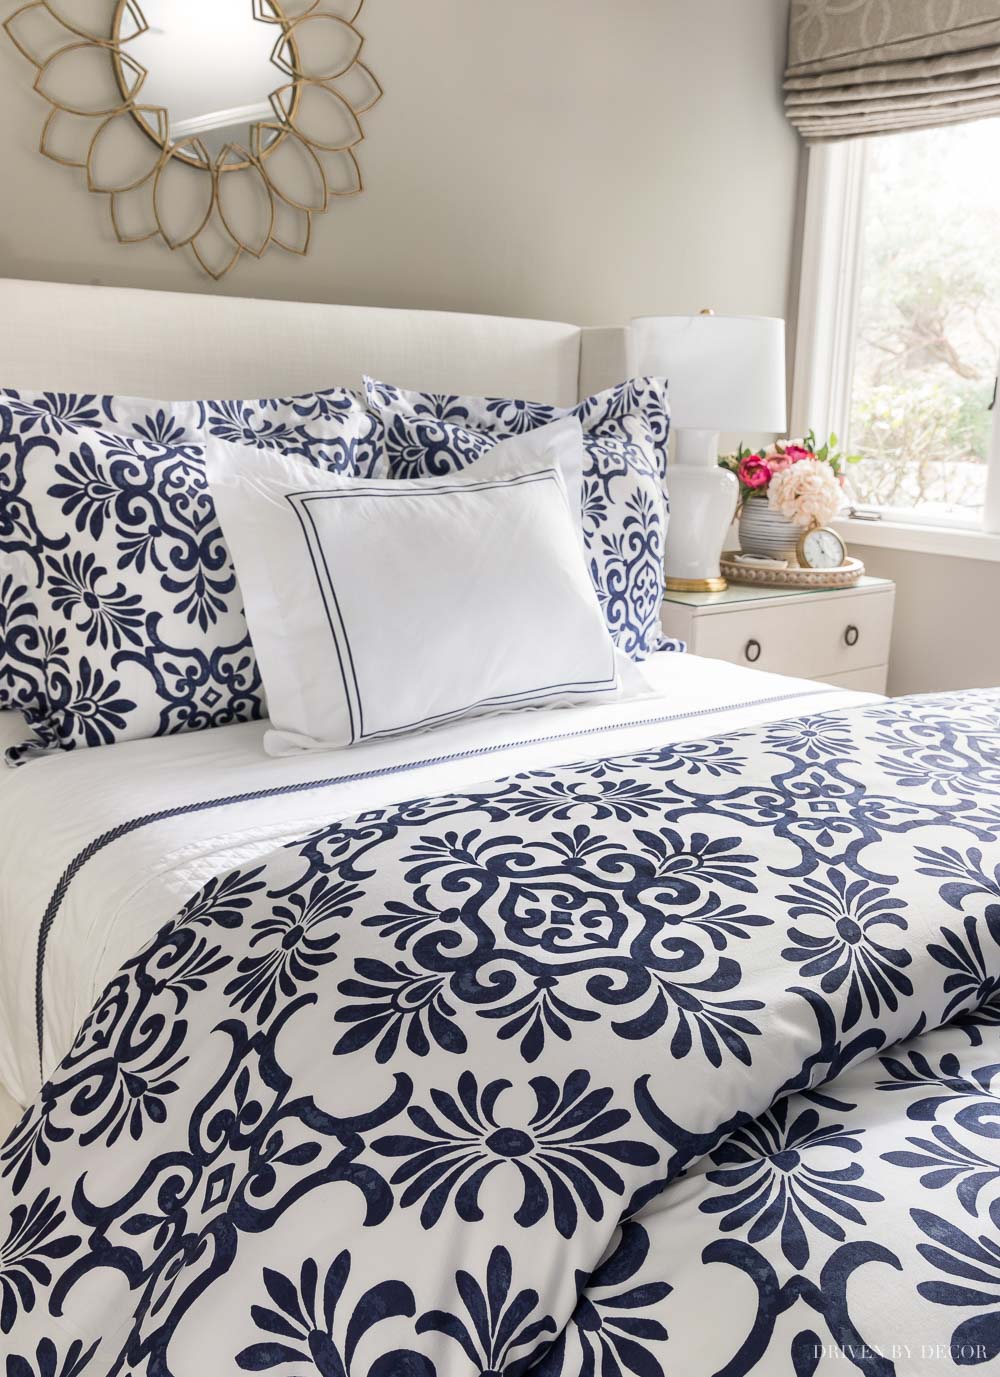 Great post on the best duvet inserts including details on the importance of fill power!